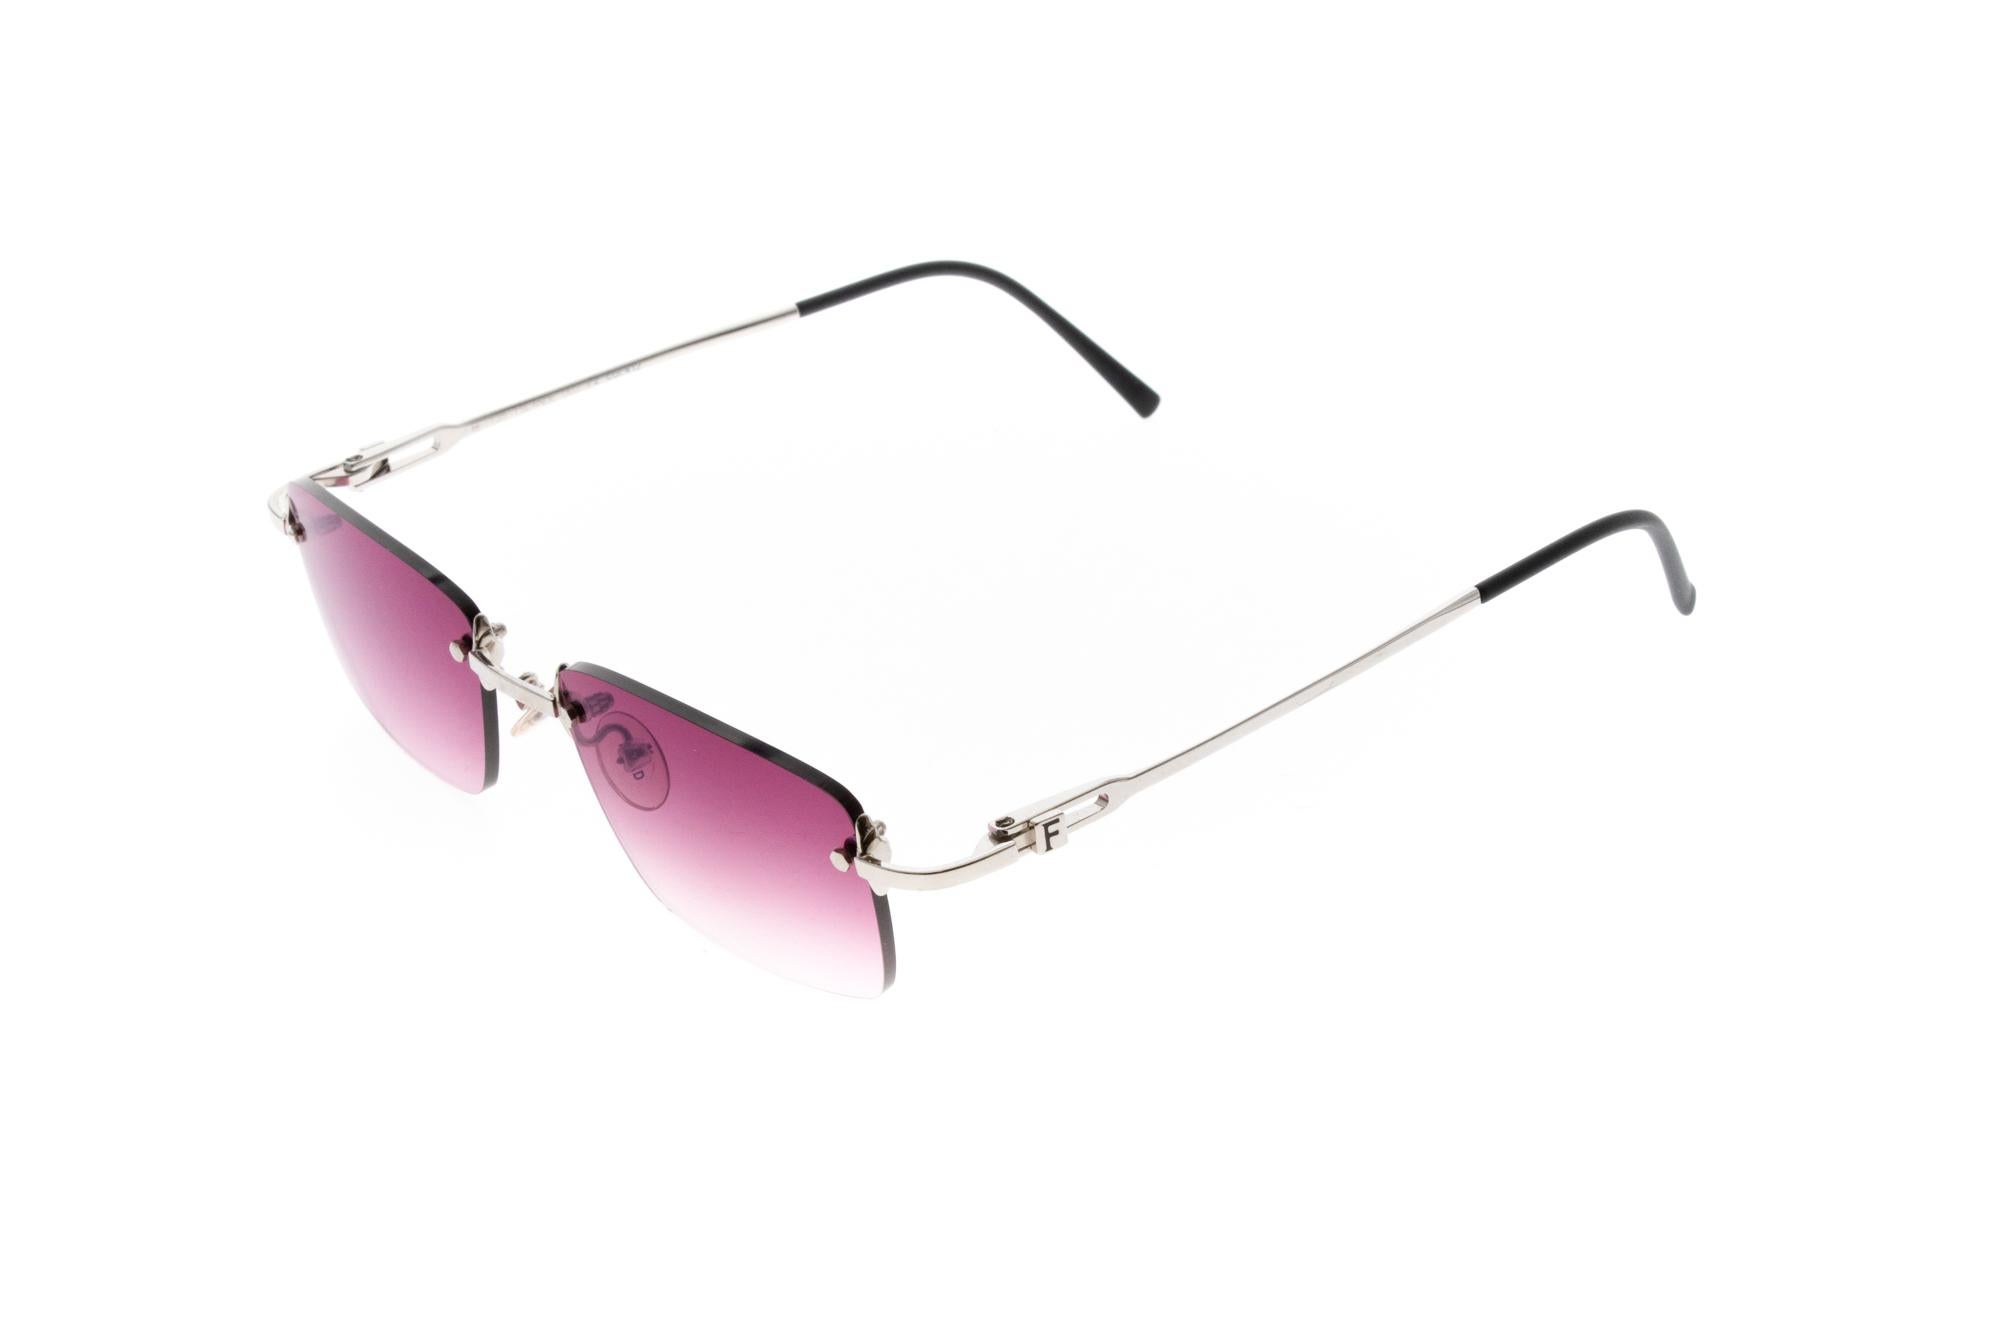 This high quality Fred Lunettes Islande F2 Col.412 model is made in the Jura Region in France. Fred had produced fine jewellery for decades and their impeccable eyewear is made with the same luxury and style. Together with the rimless purple mirror